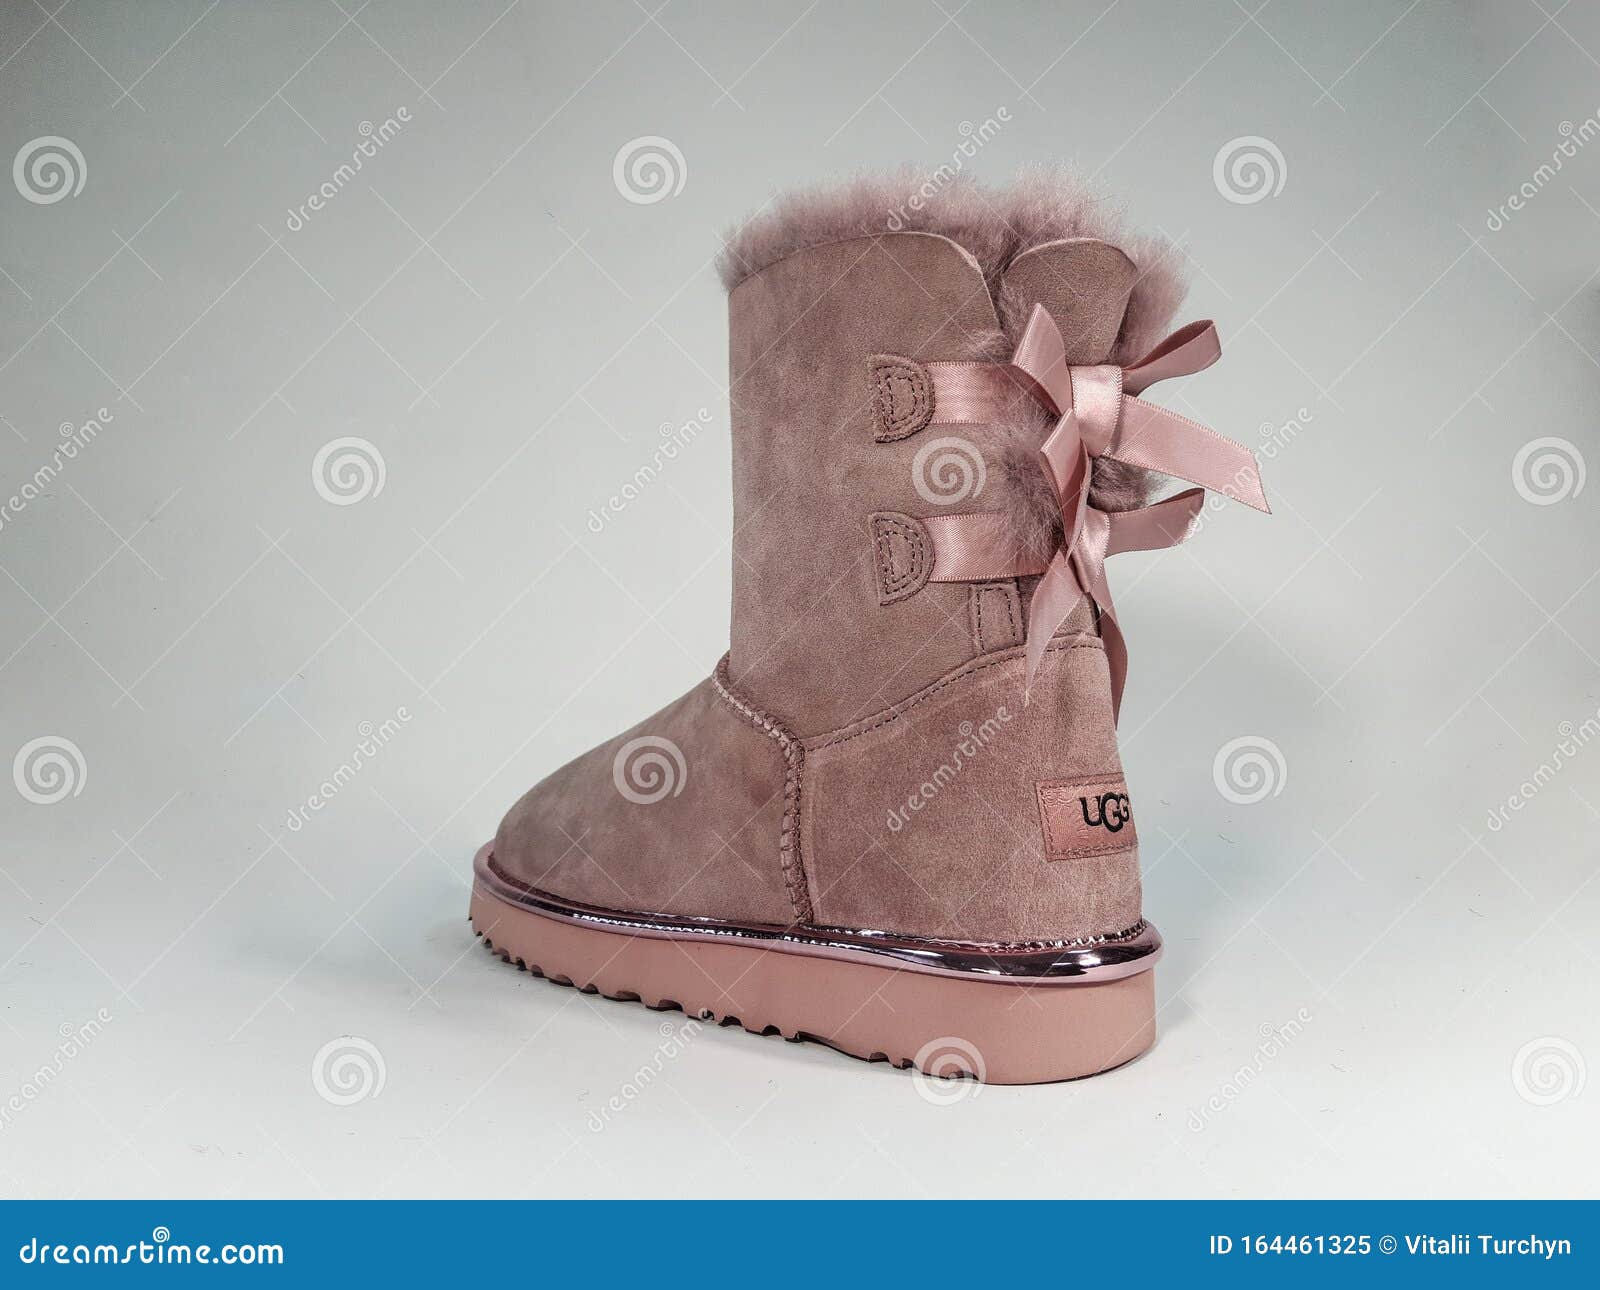 Women`s Winter Boots on Fur. Shoes Ugg Editorial Image - Image of snow ...